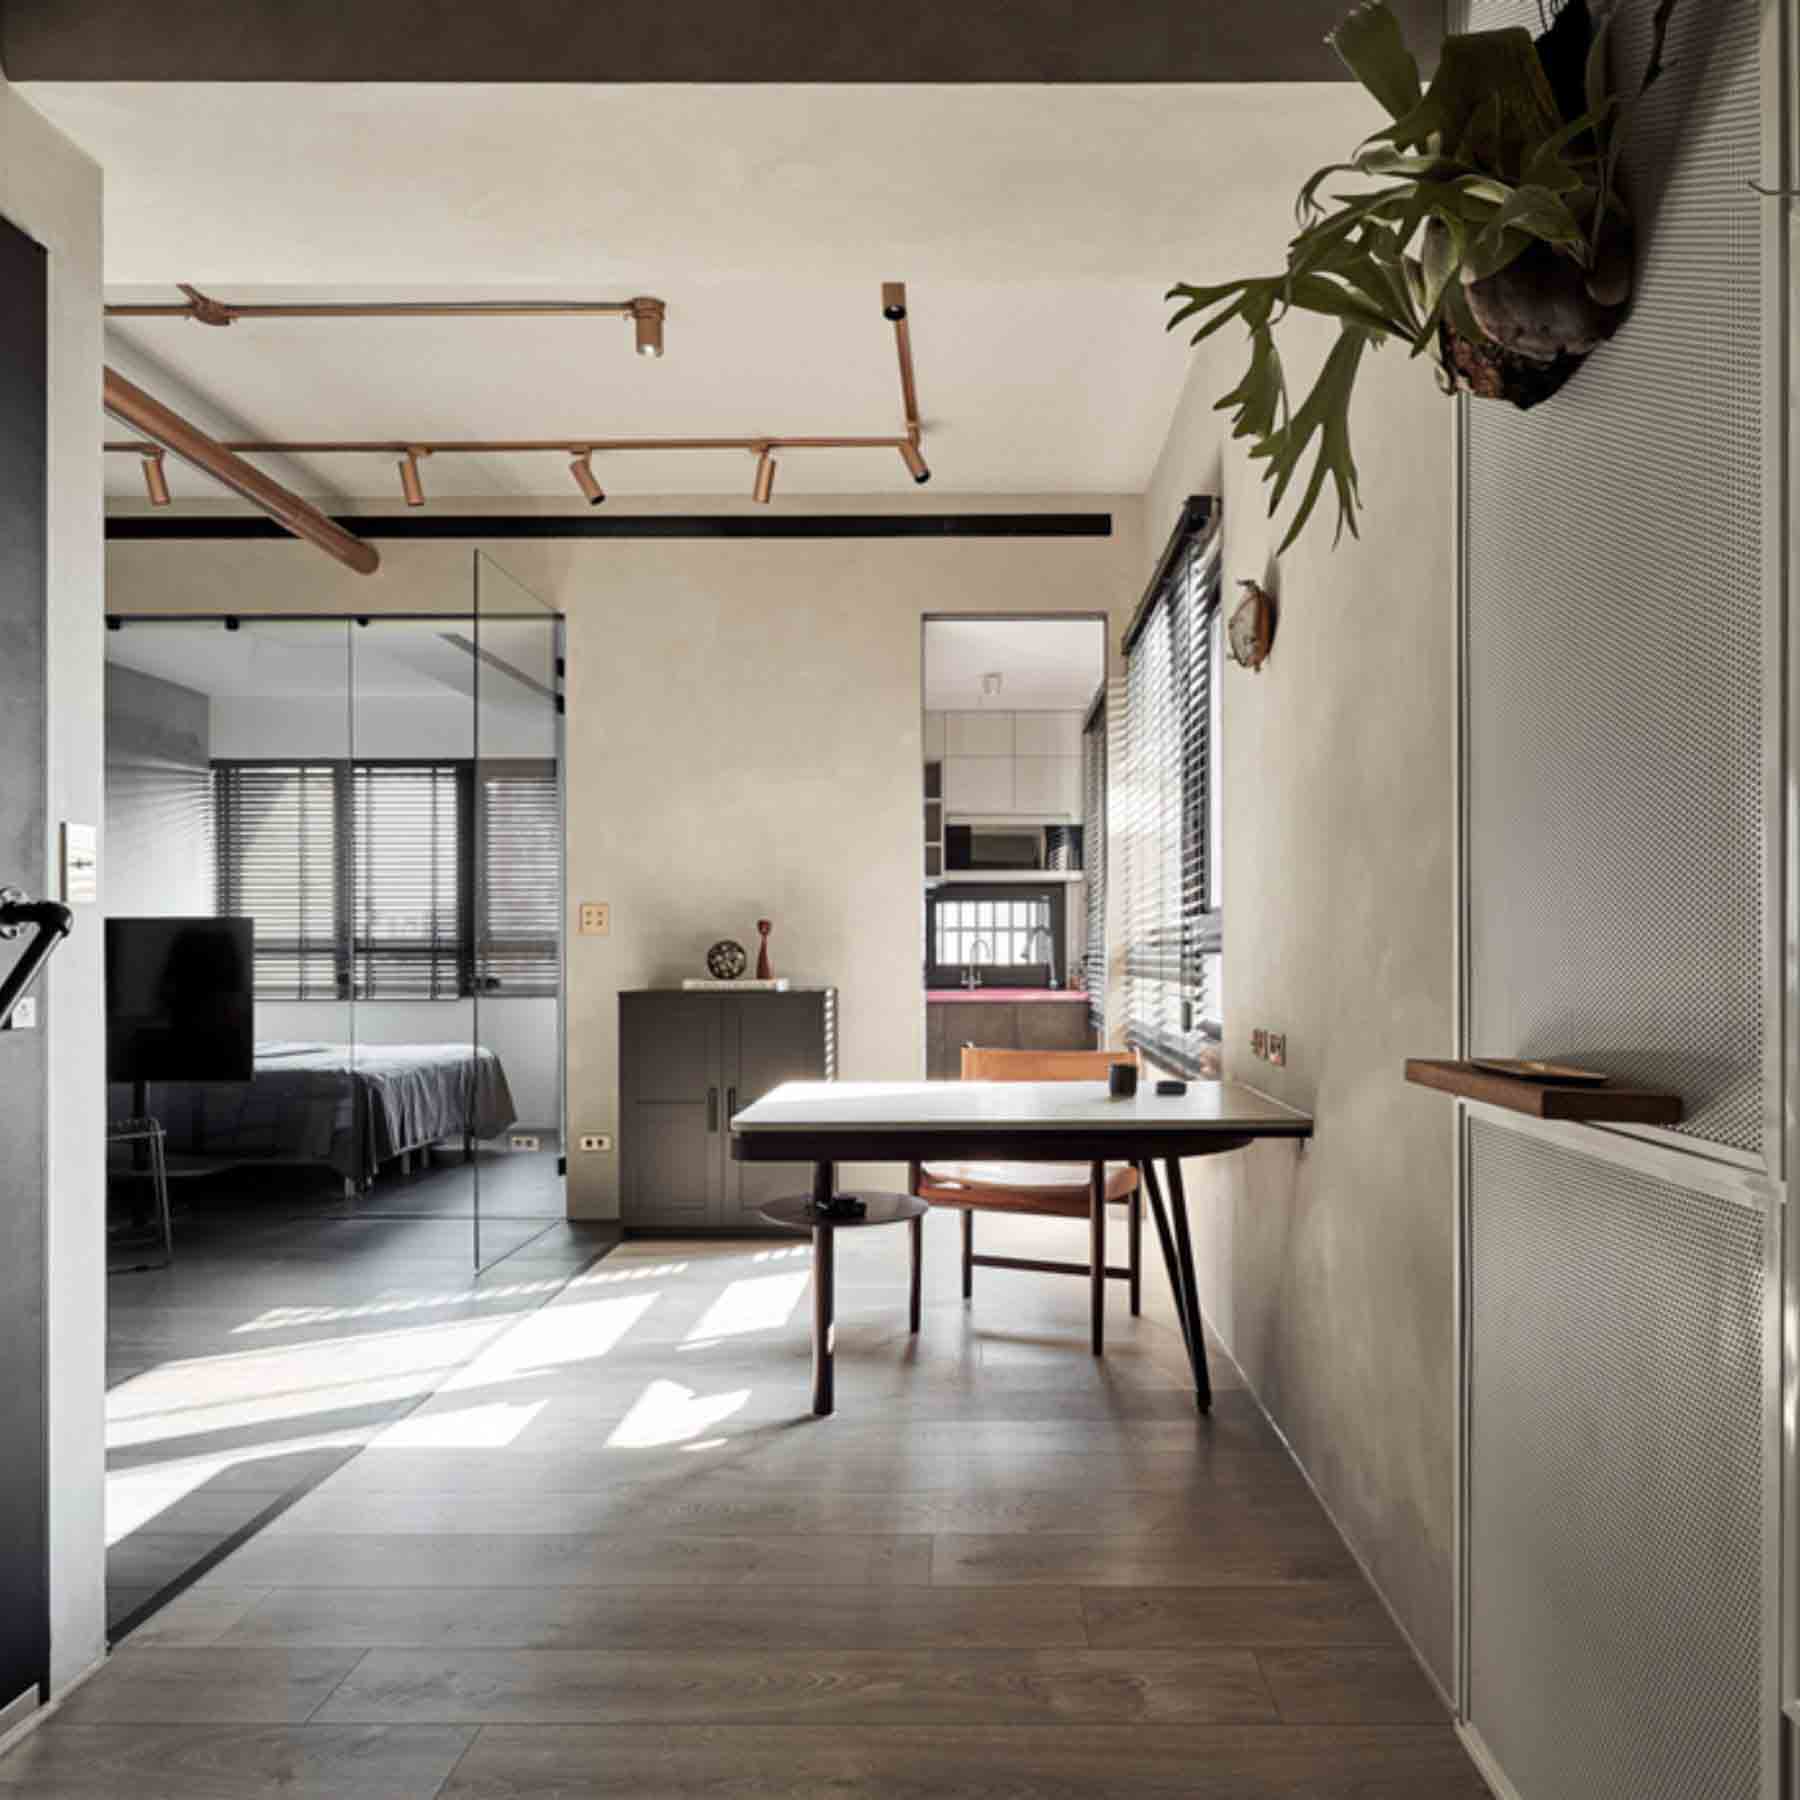 the fusion of minimalism and industrial design results in a contemporary and tranquil ambiance for homeowners